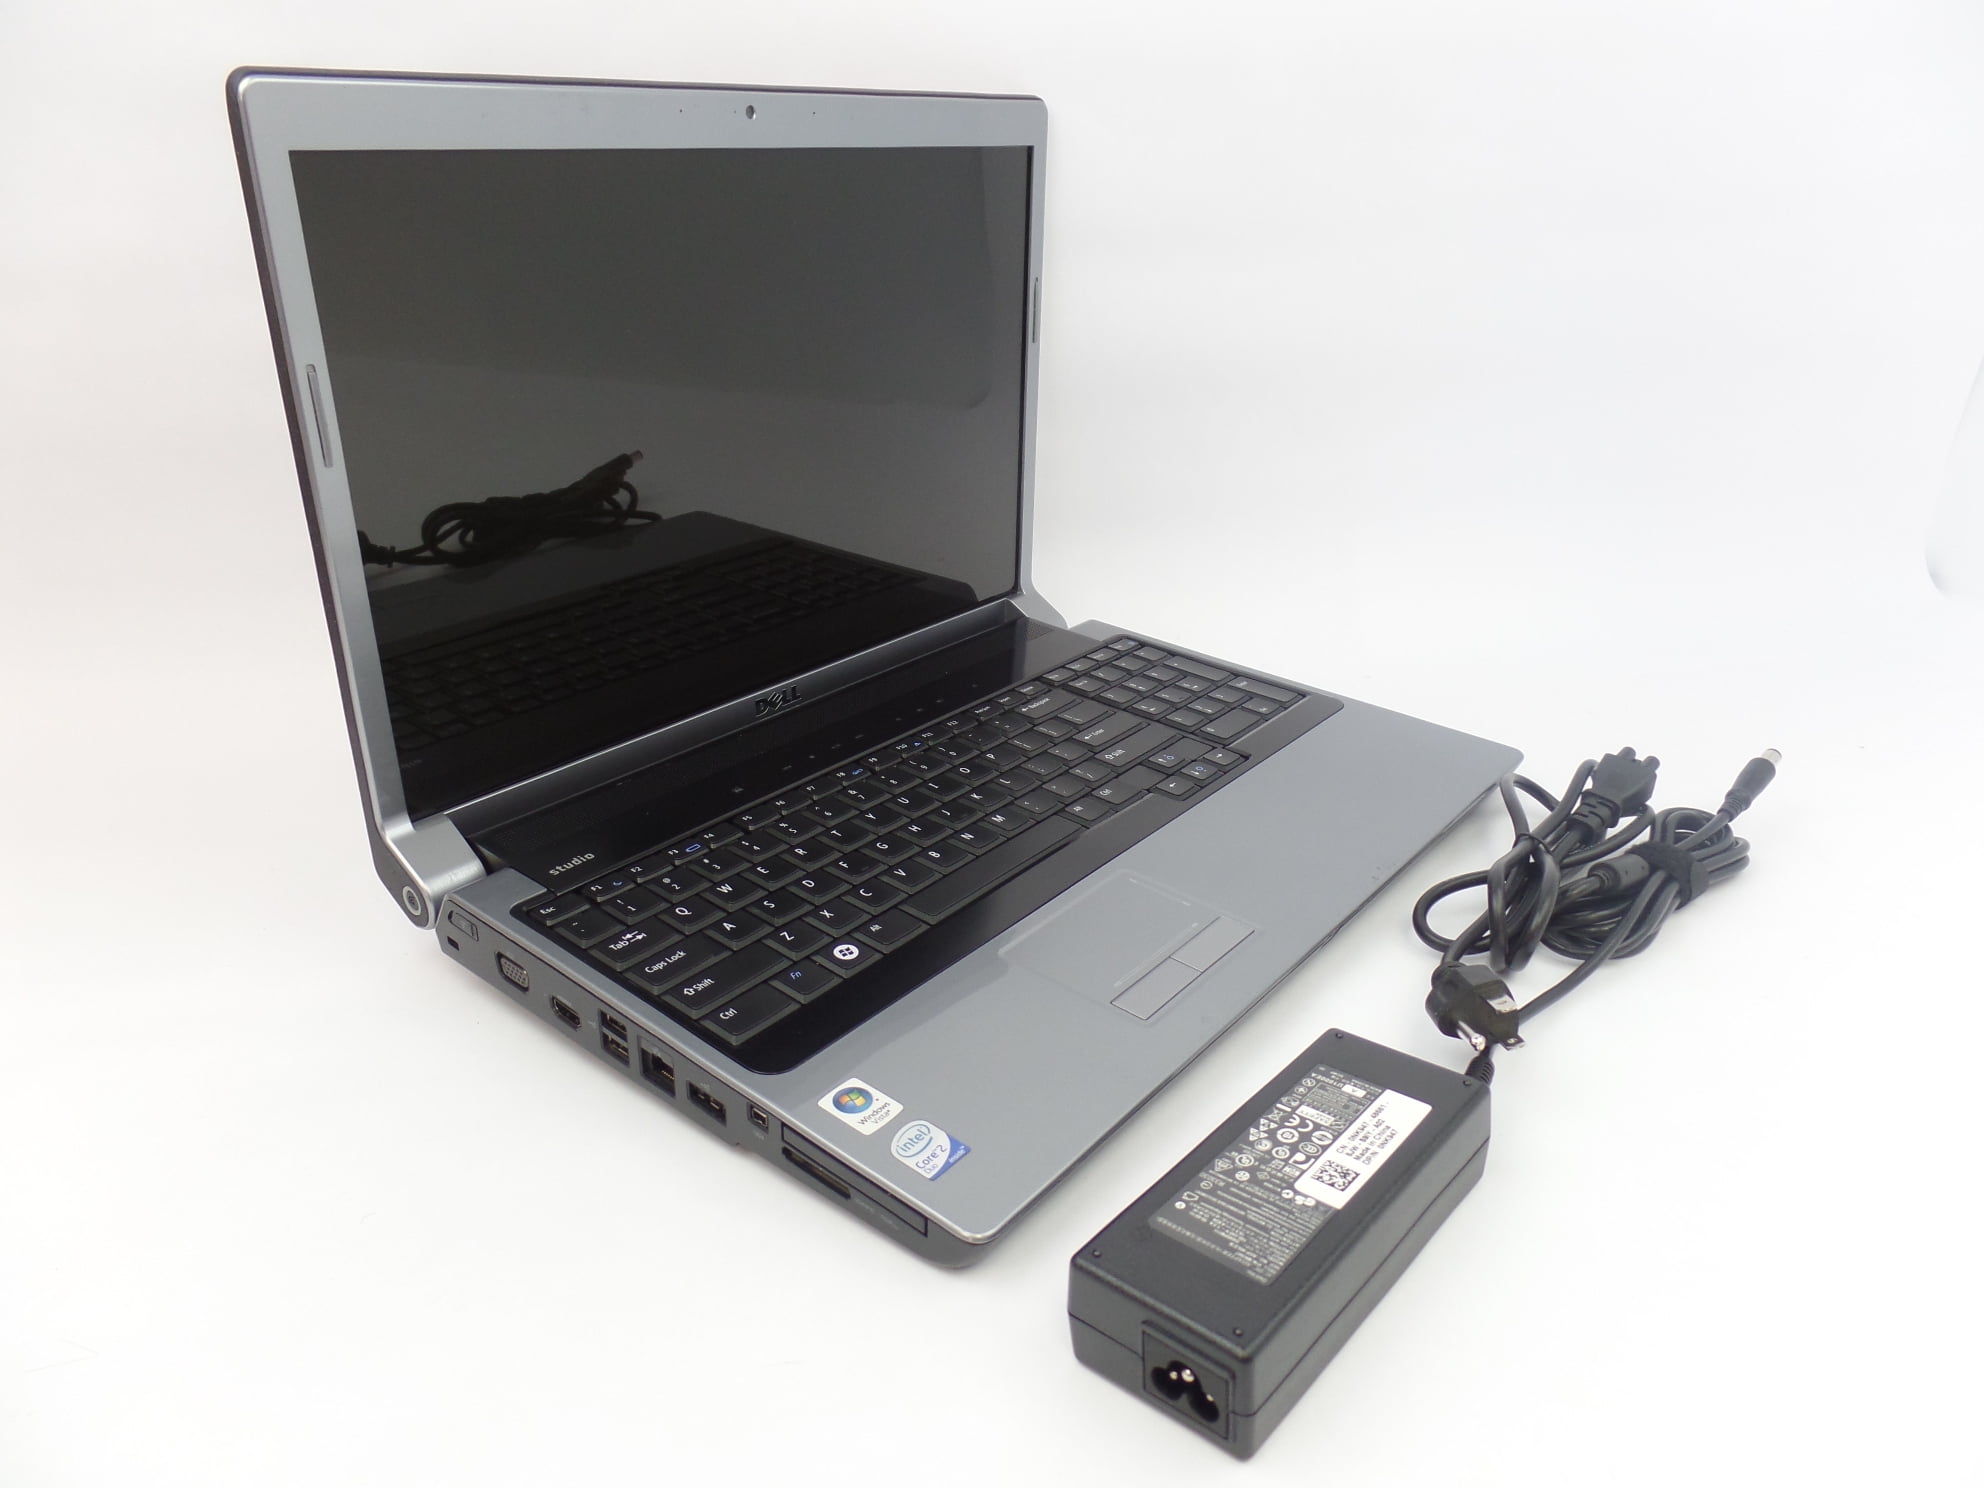 tempel Cyclopen haag Used (good working condition) Dell Studio 1737 17.3" WXGA+ Core 2 Duo T5800  2.0GHz 3GB 320GB HDD W7P Laptop - Walmart.com